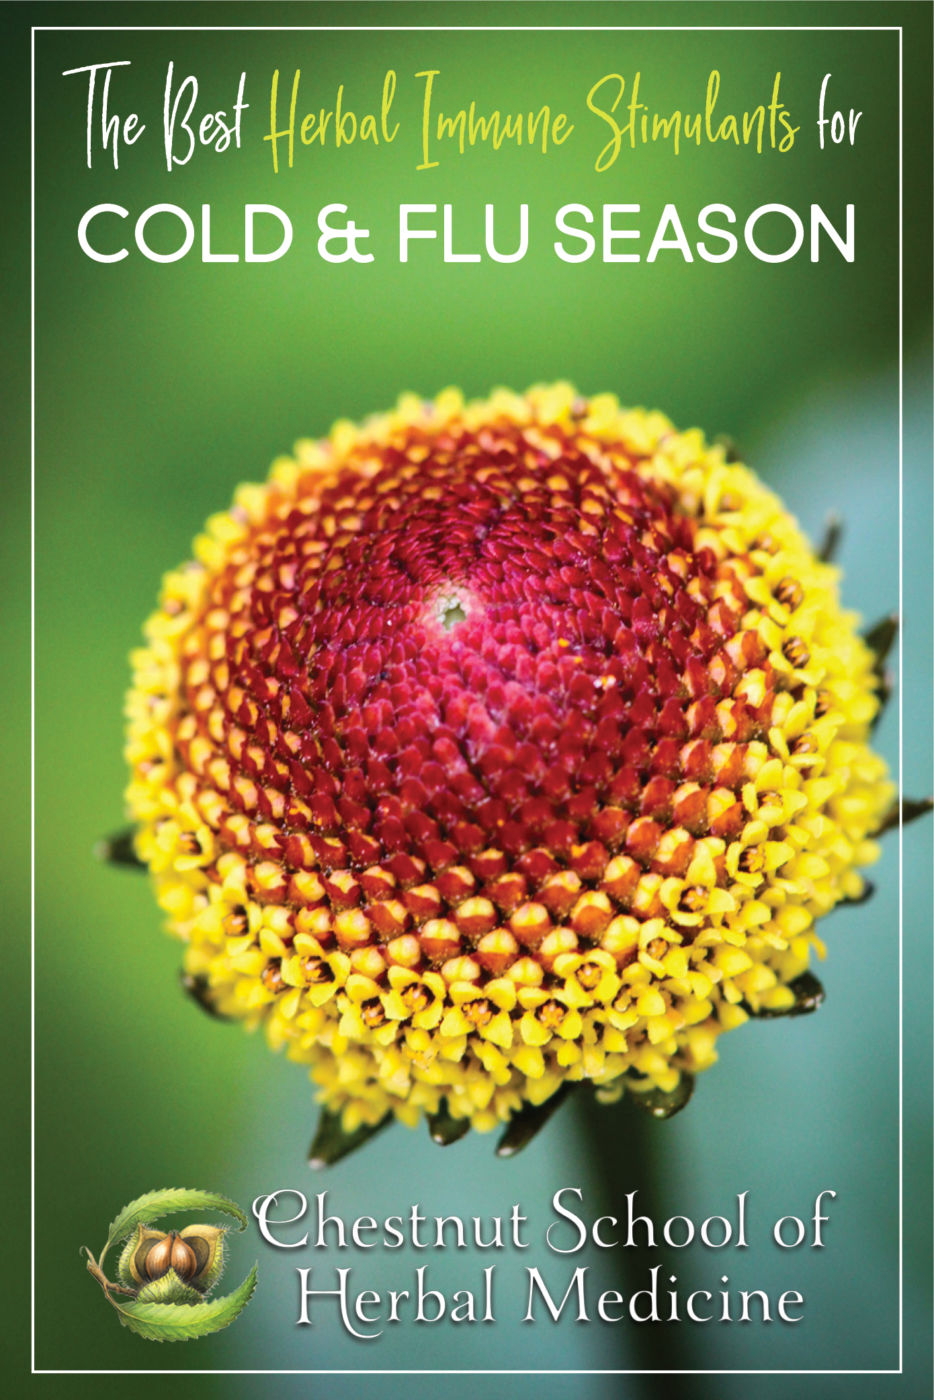 The Best Herbal Immune Stimulants for Cold and Flu Season